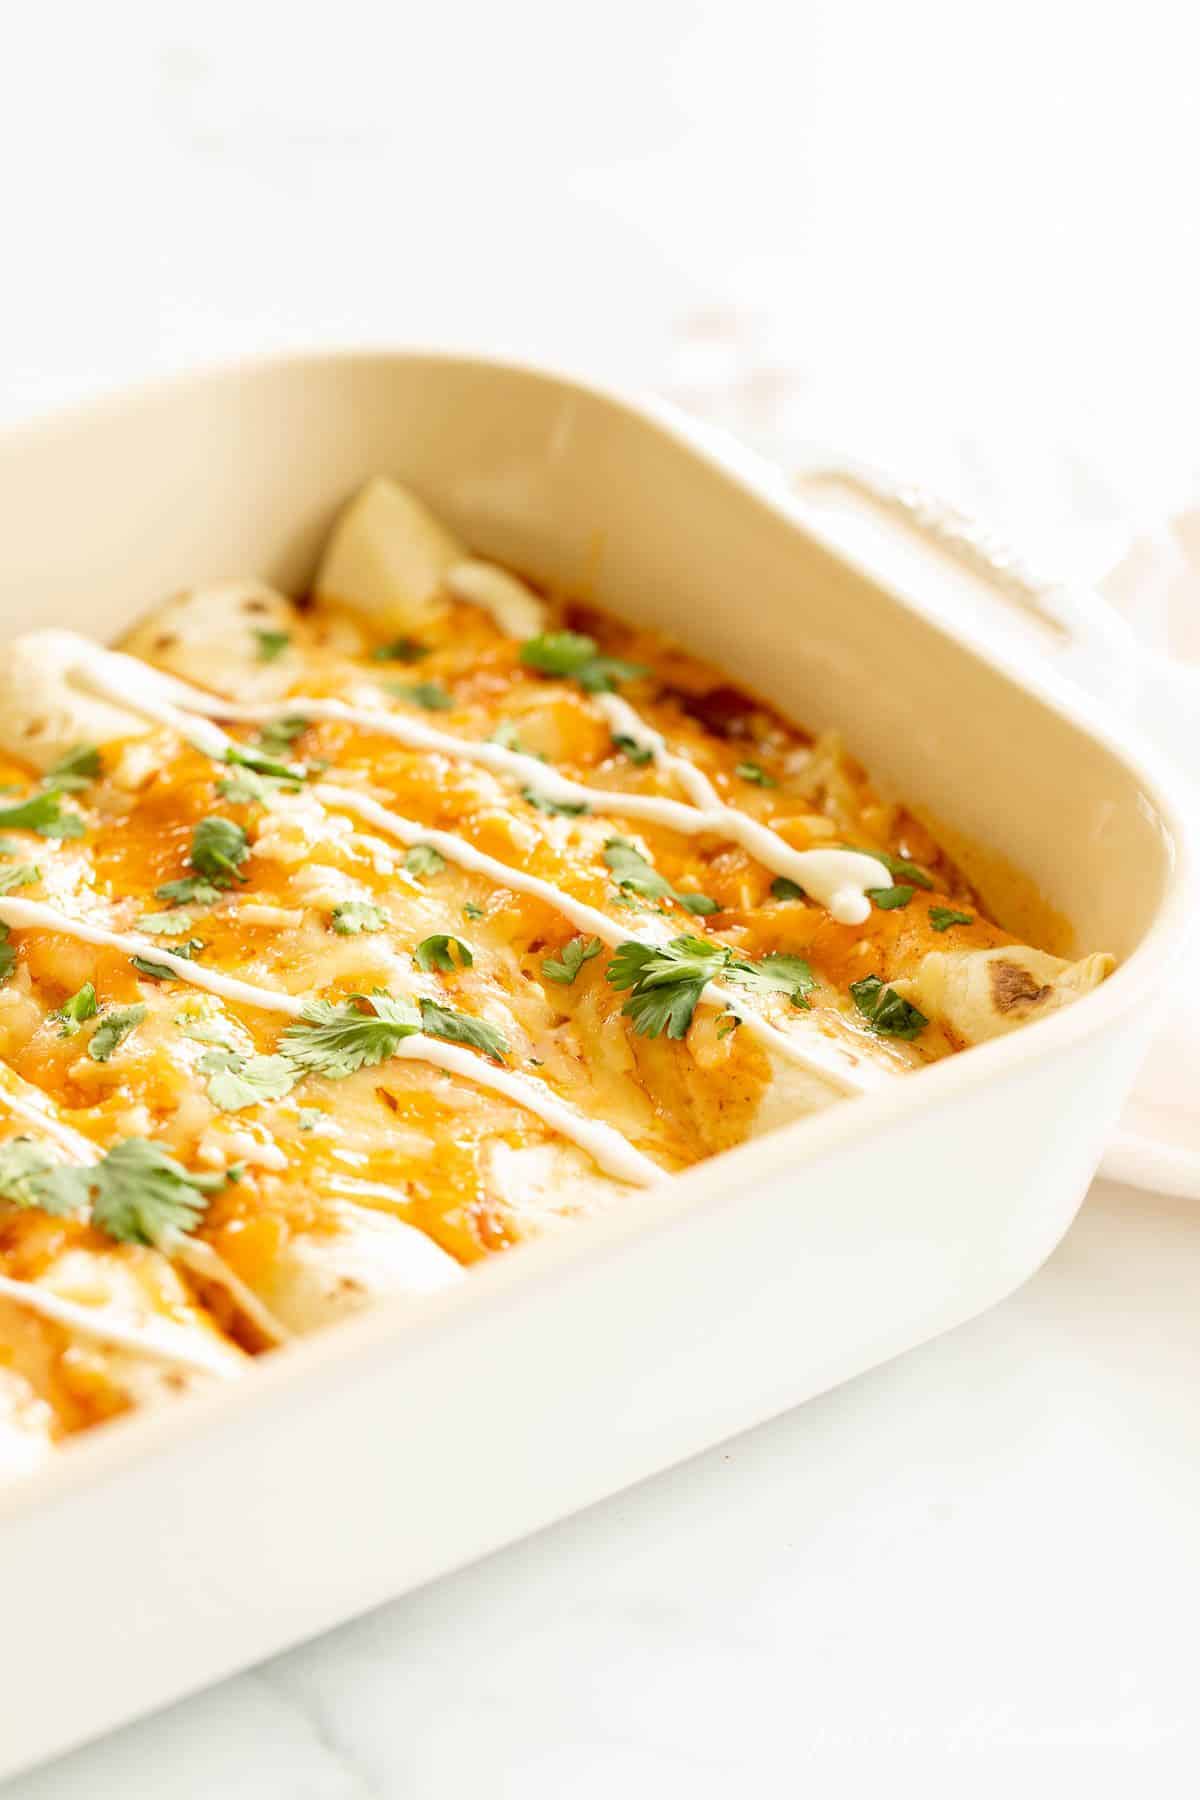 A white casserole dish filled with chicken enchiladas topped in melted cheese.